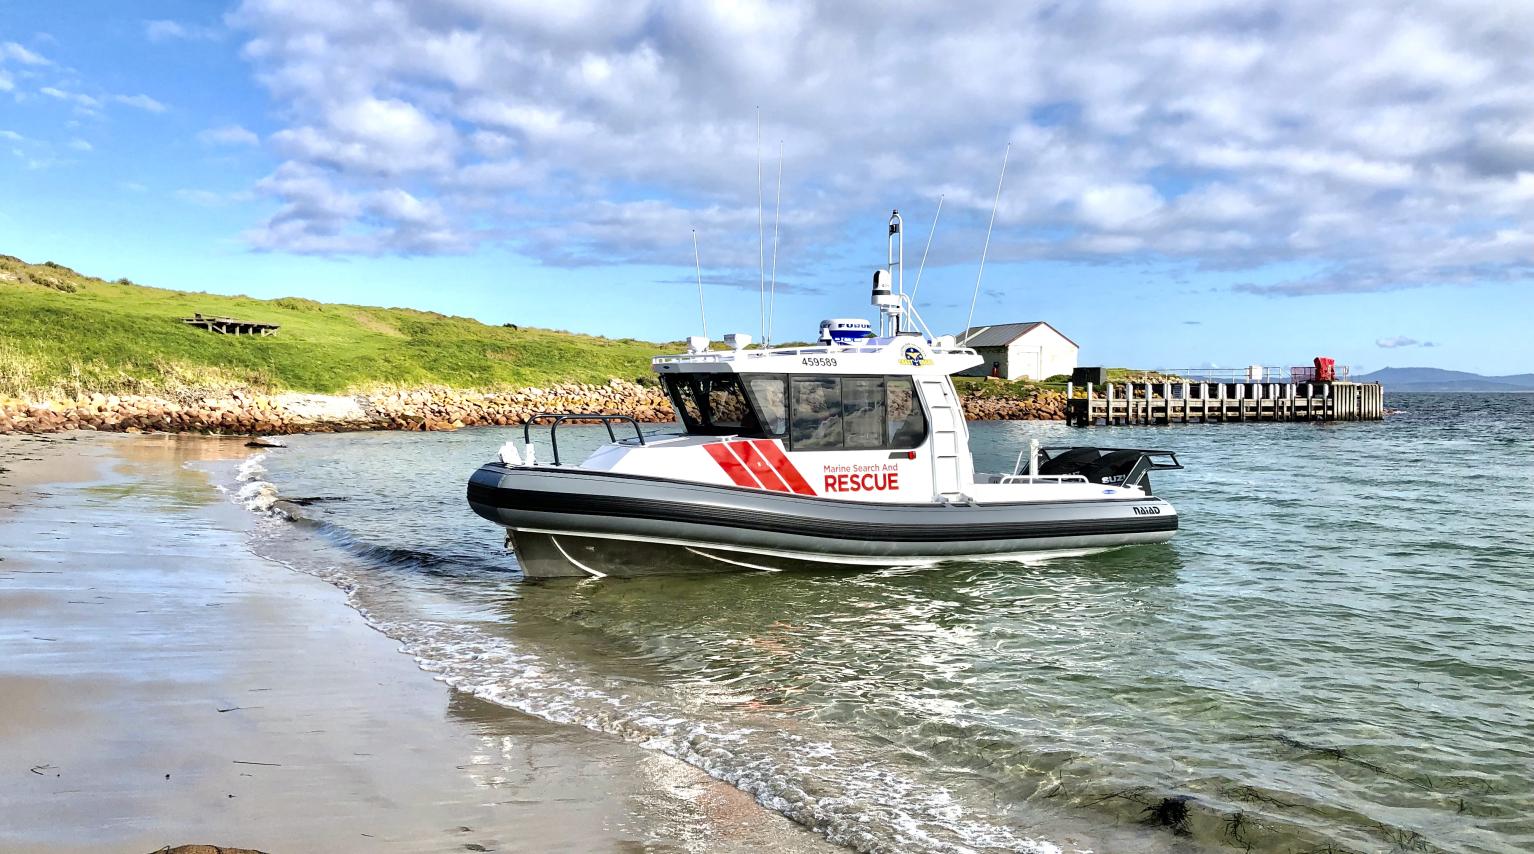 Marine Search and Rescue vessel by the shore